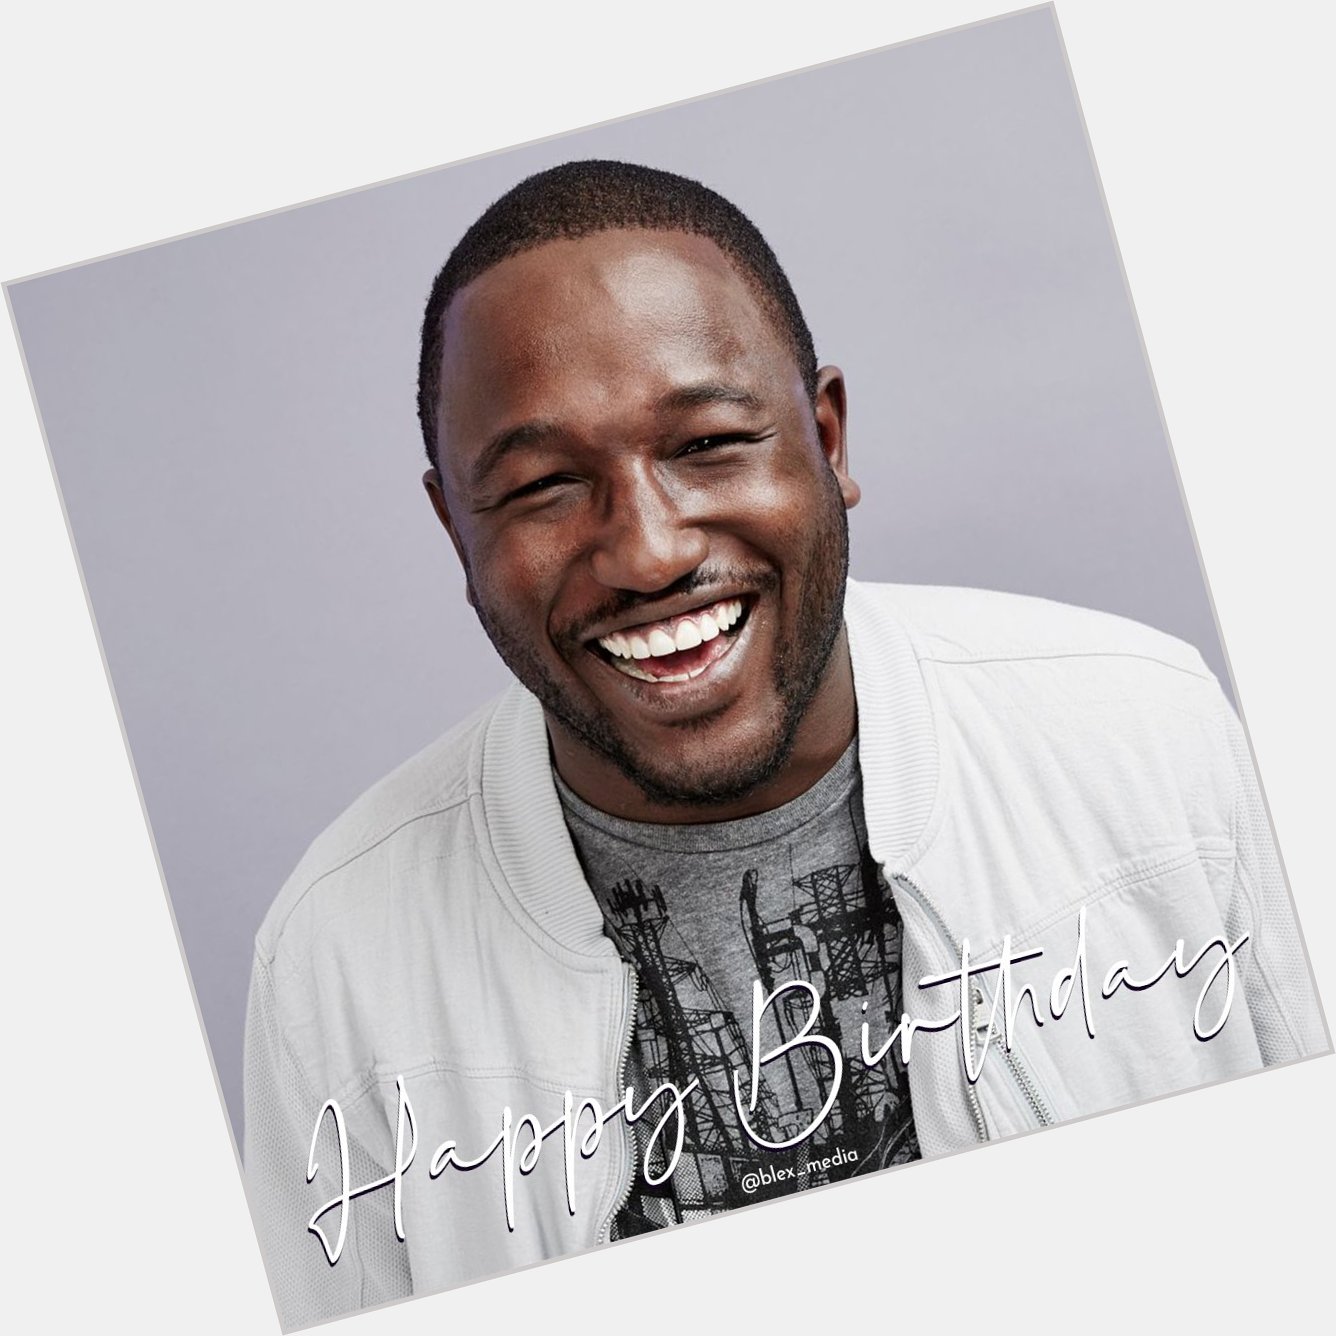 Happy Birthday Hannibal Buress, he\s known for many roles but my favorite of his is in \Broad City\. 